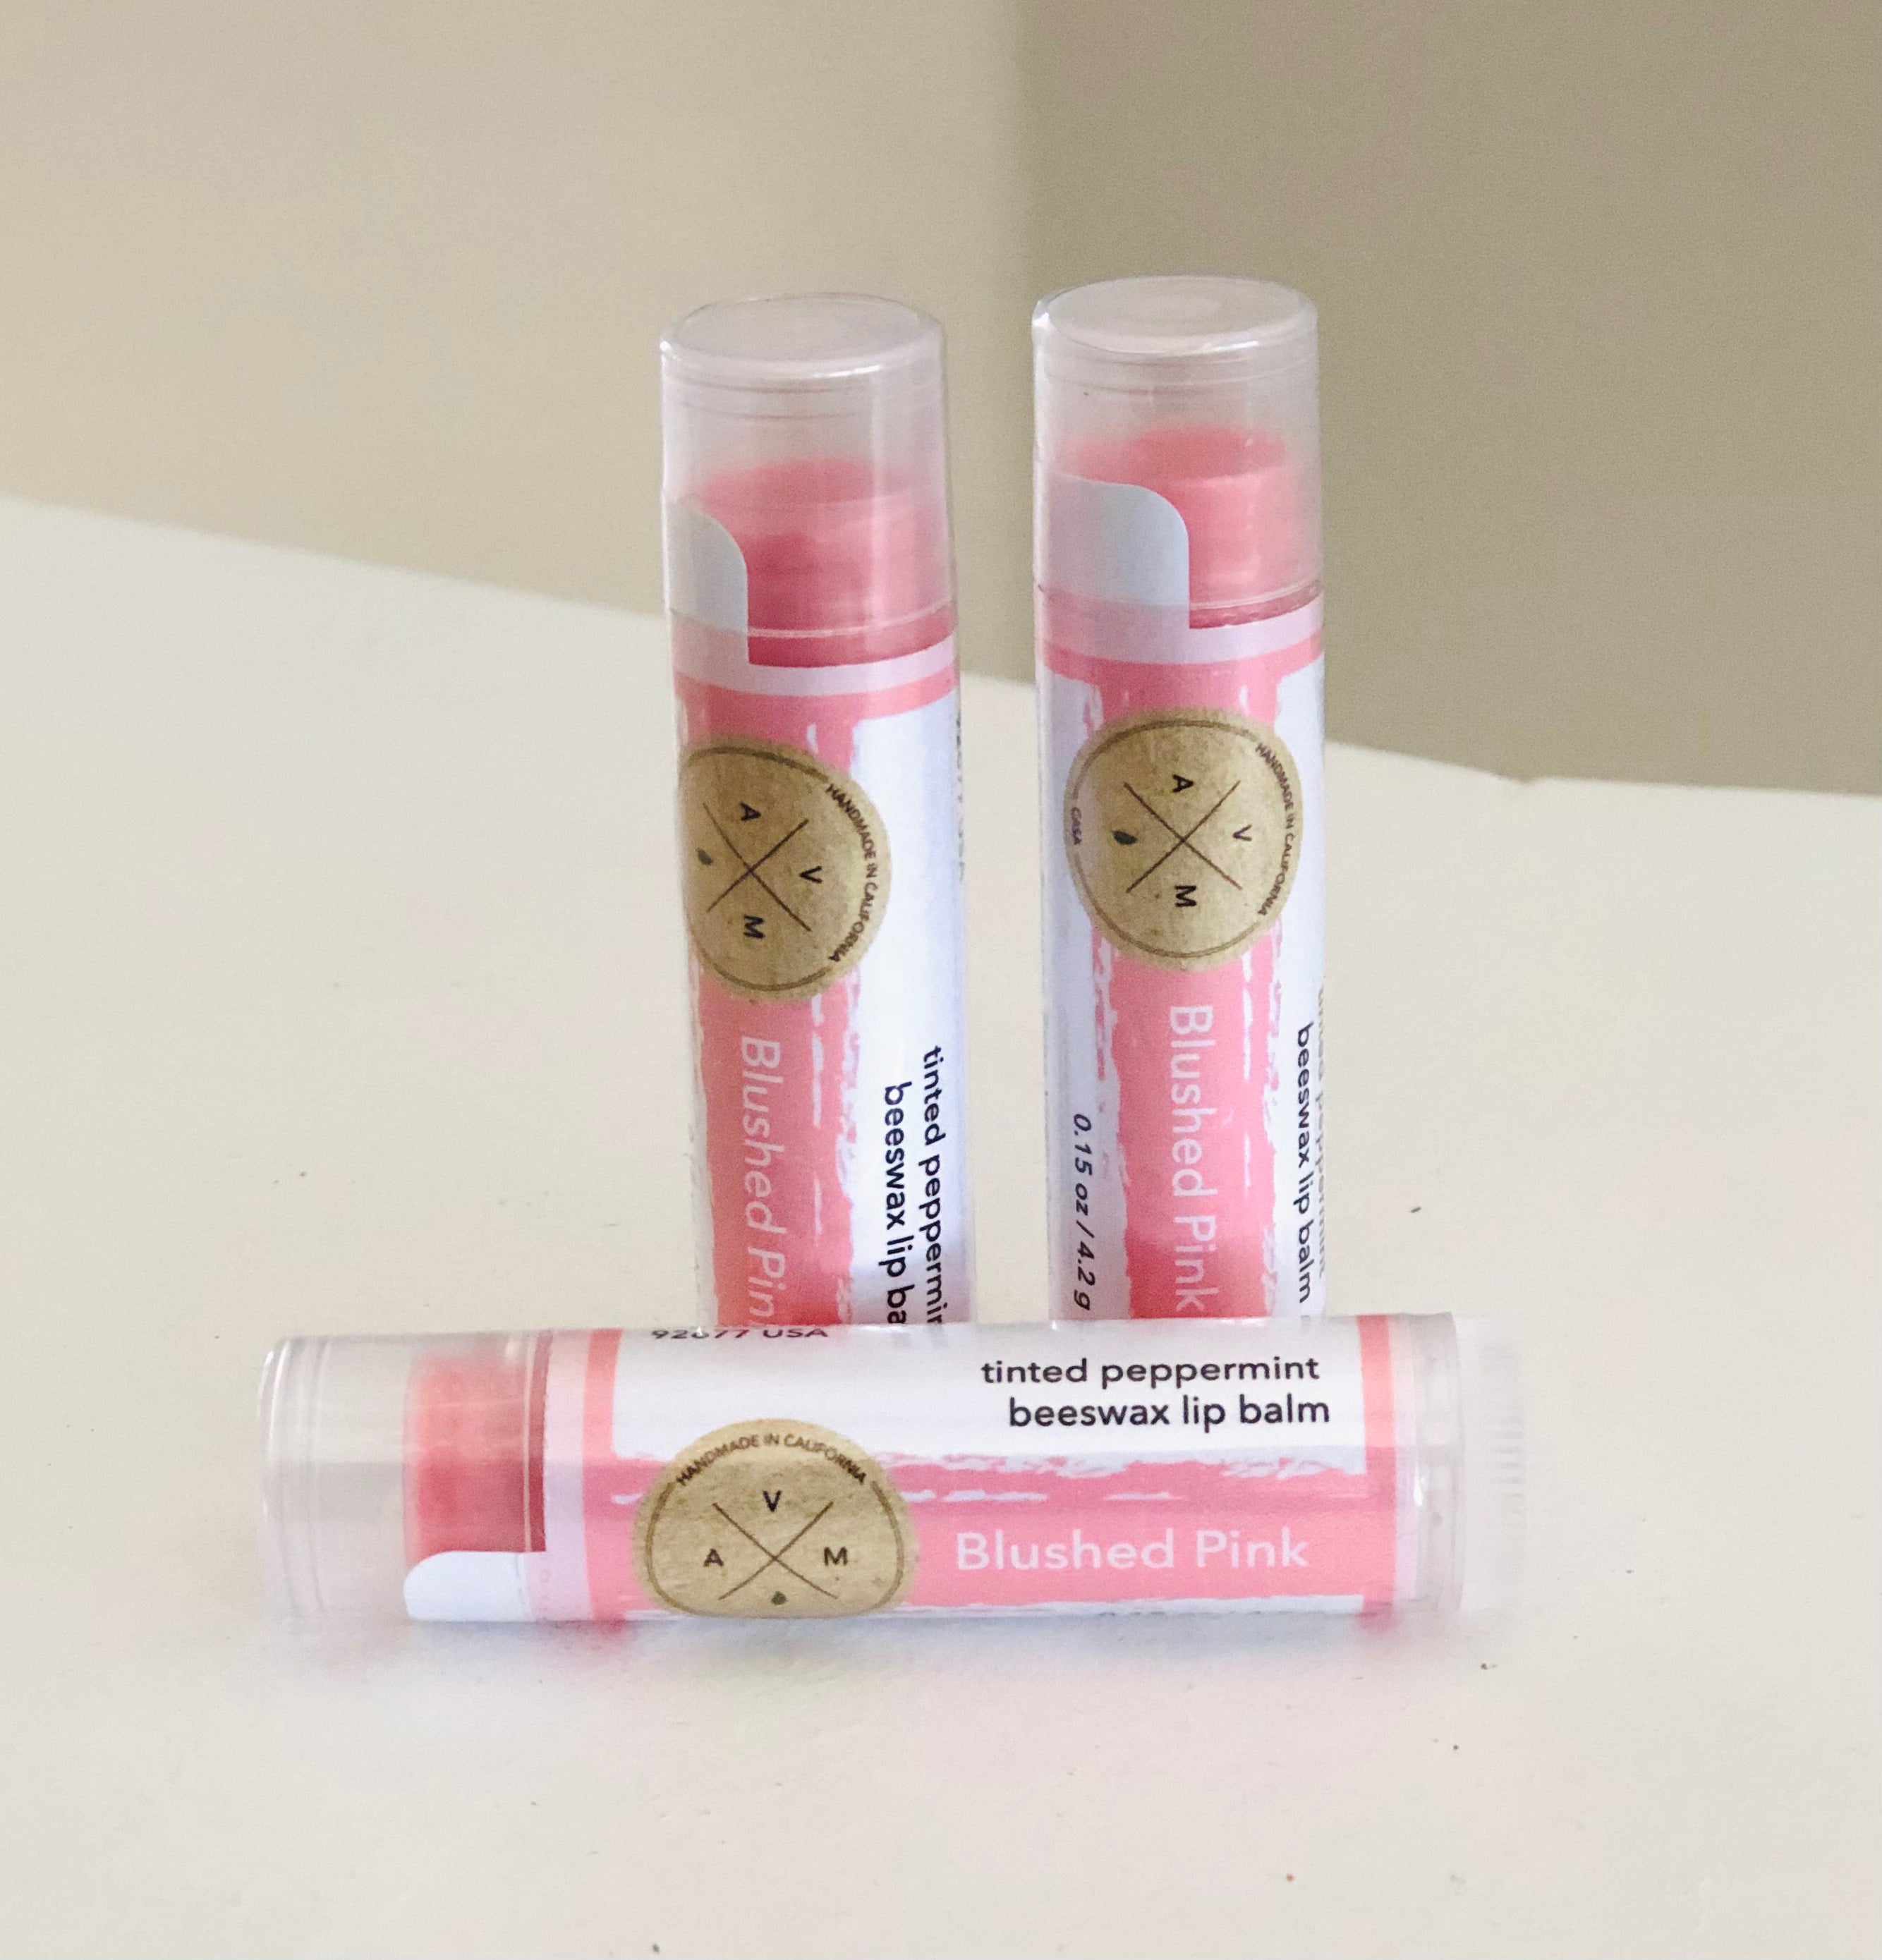 Tinted Peppermint Beeswax Lip Balm